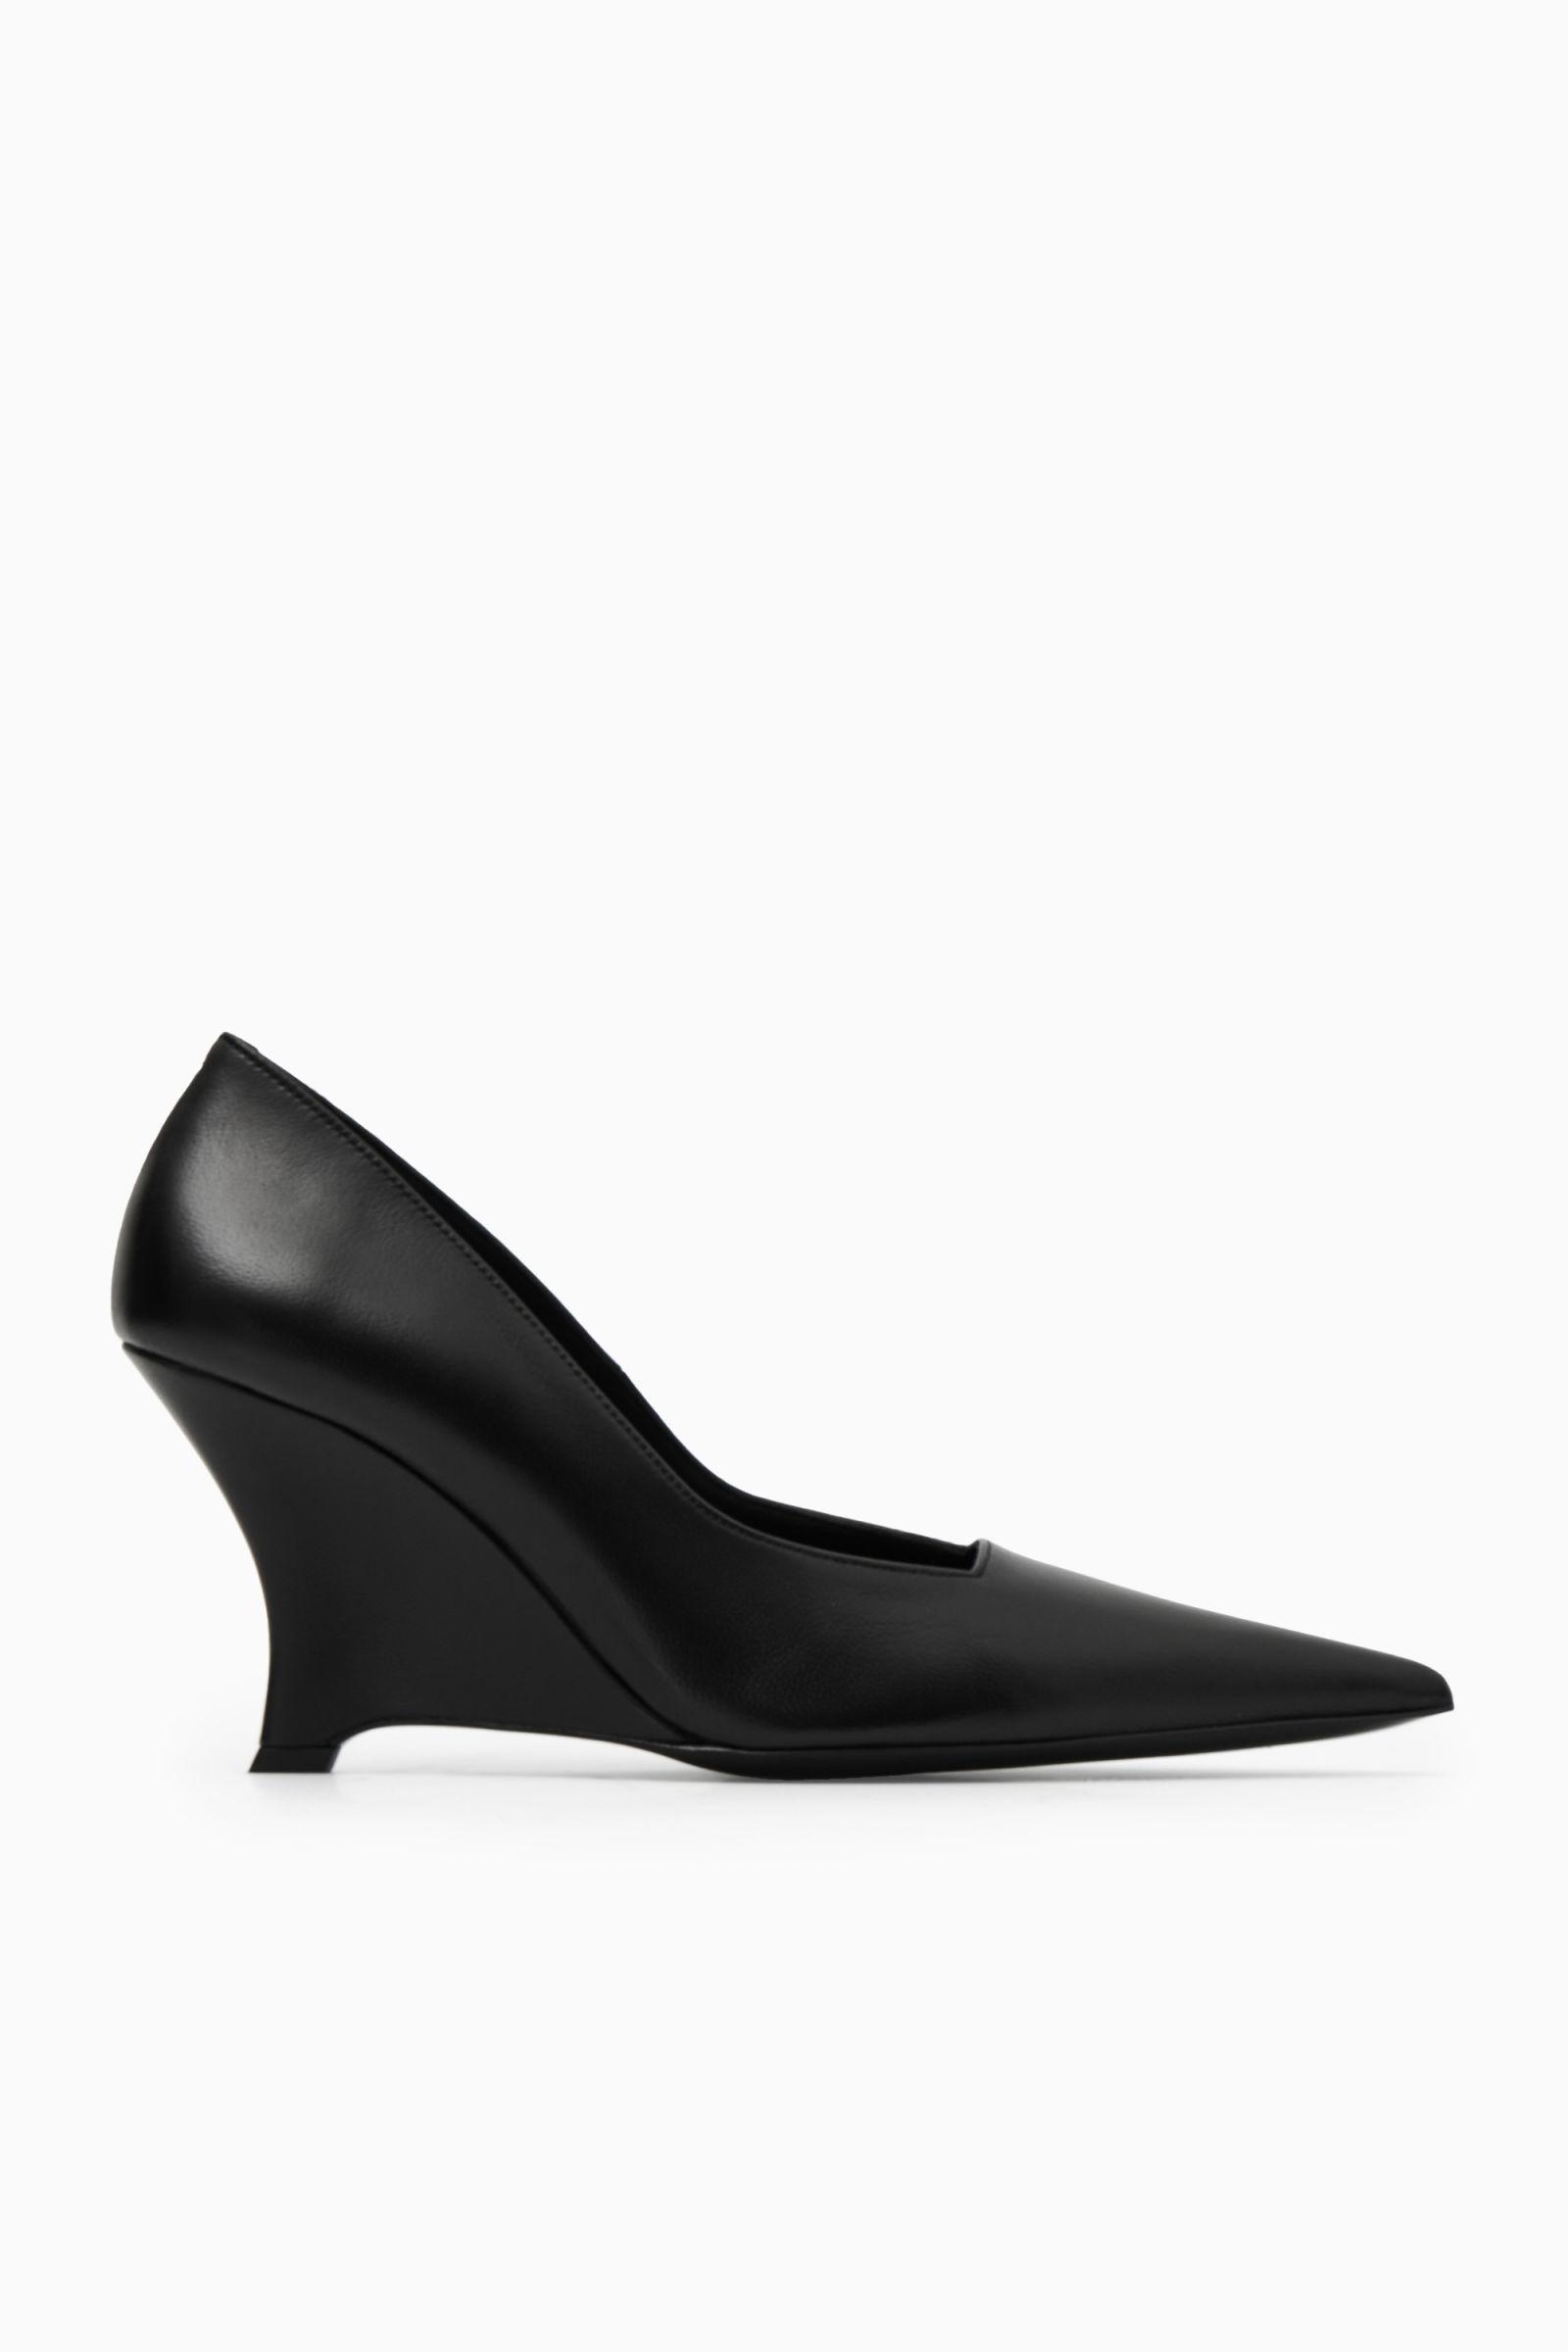 COS Pointed Leather Wedge Pumps in Black | Lyst UK